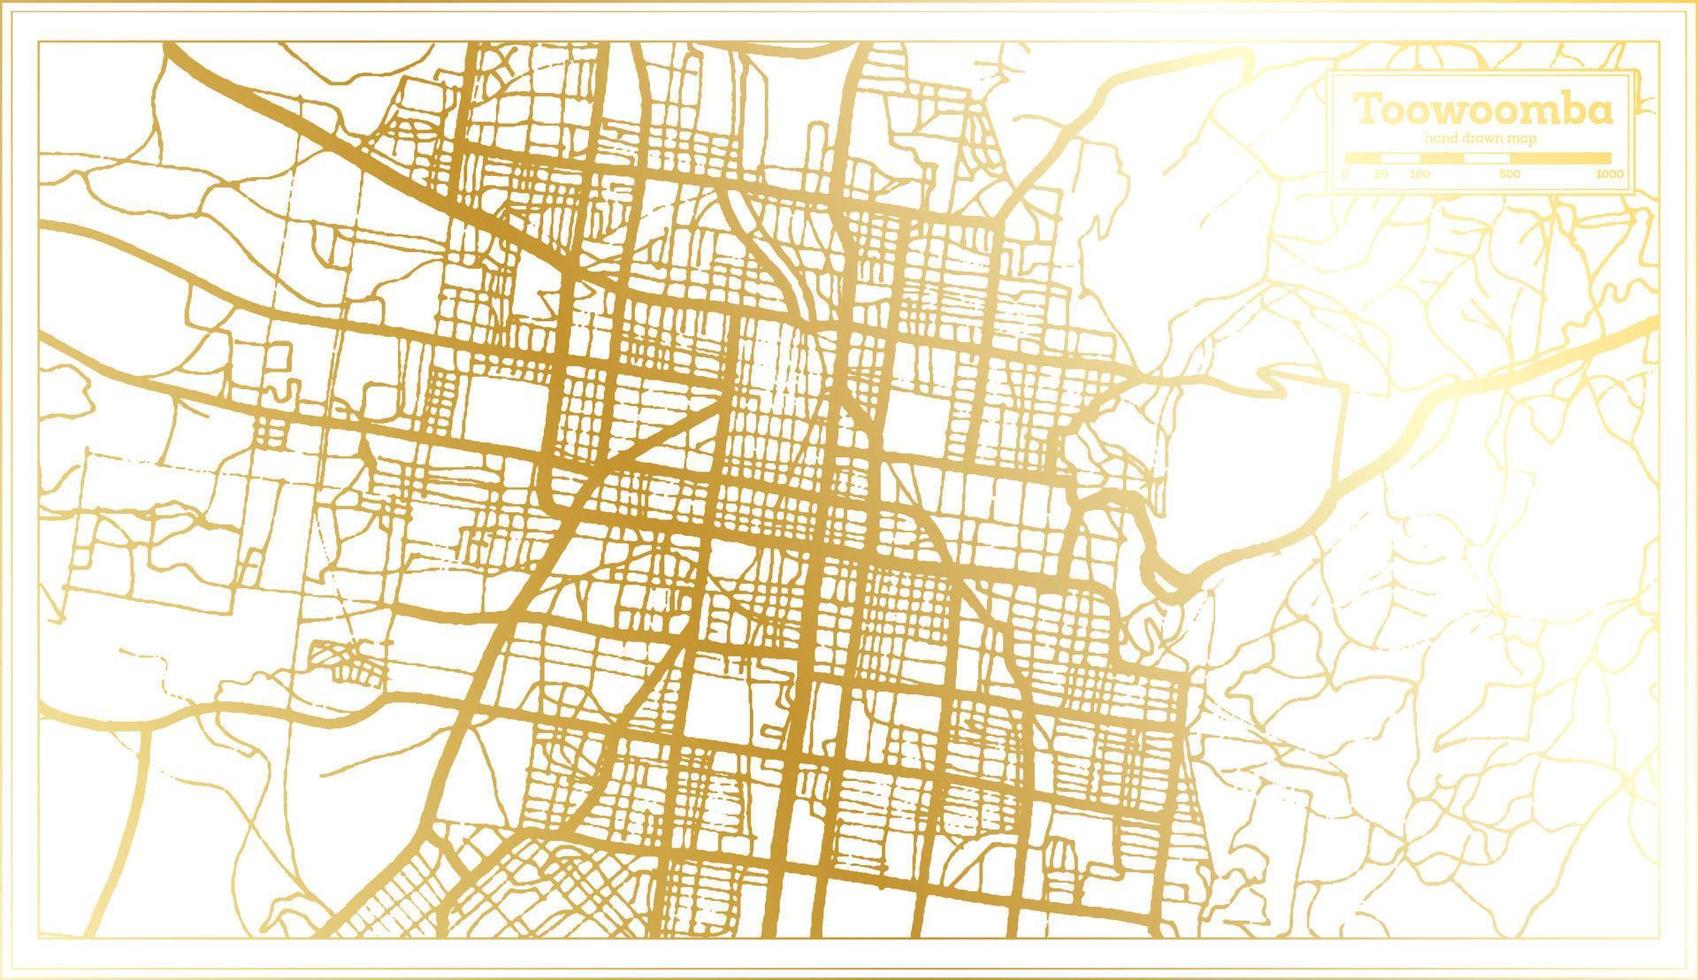 Toowoomba Australia City Map in Retro Style in Golden Color. Outline Map. vector